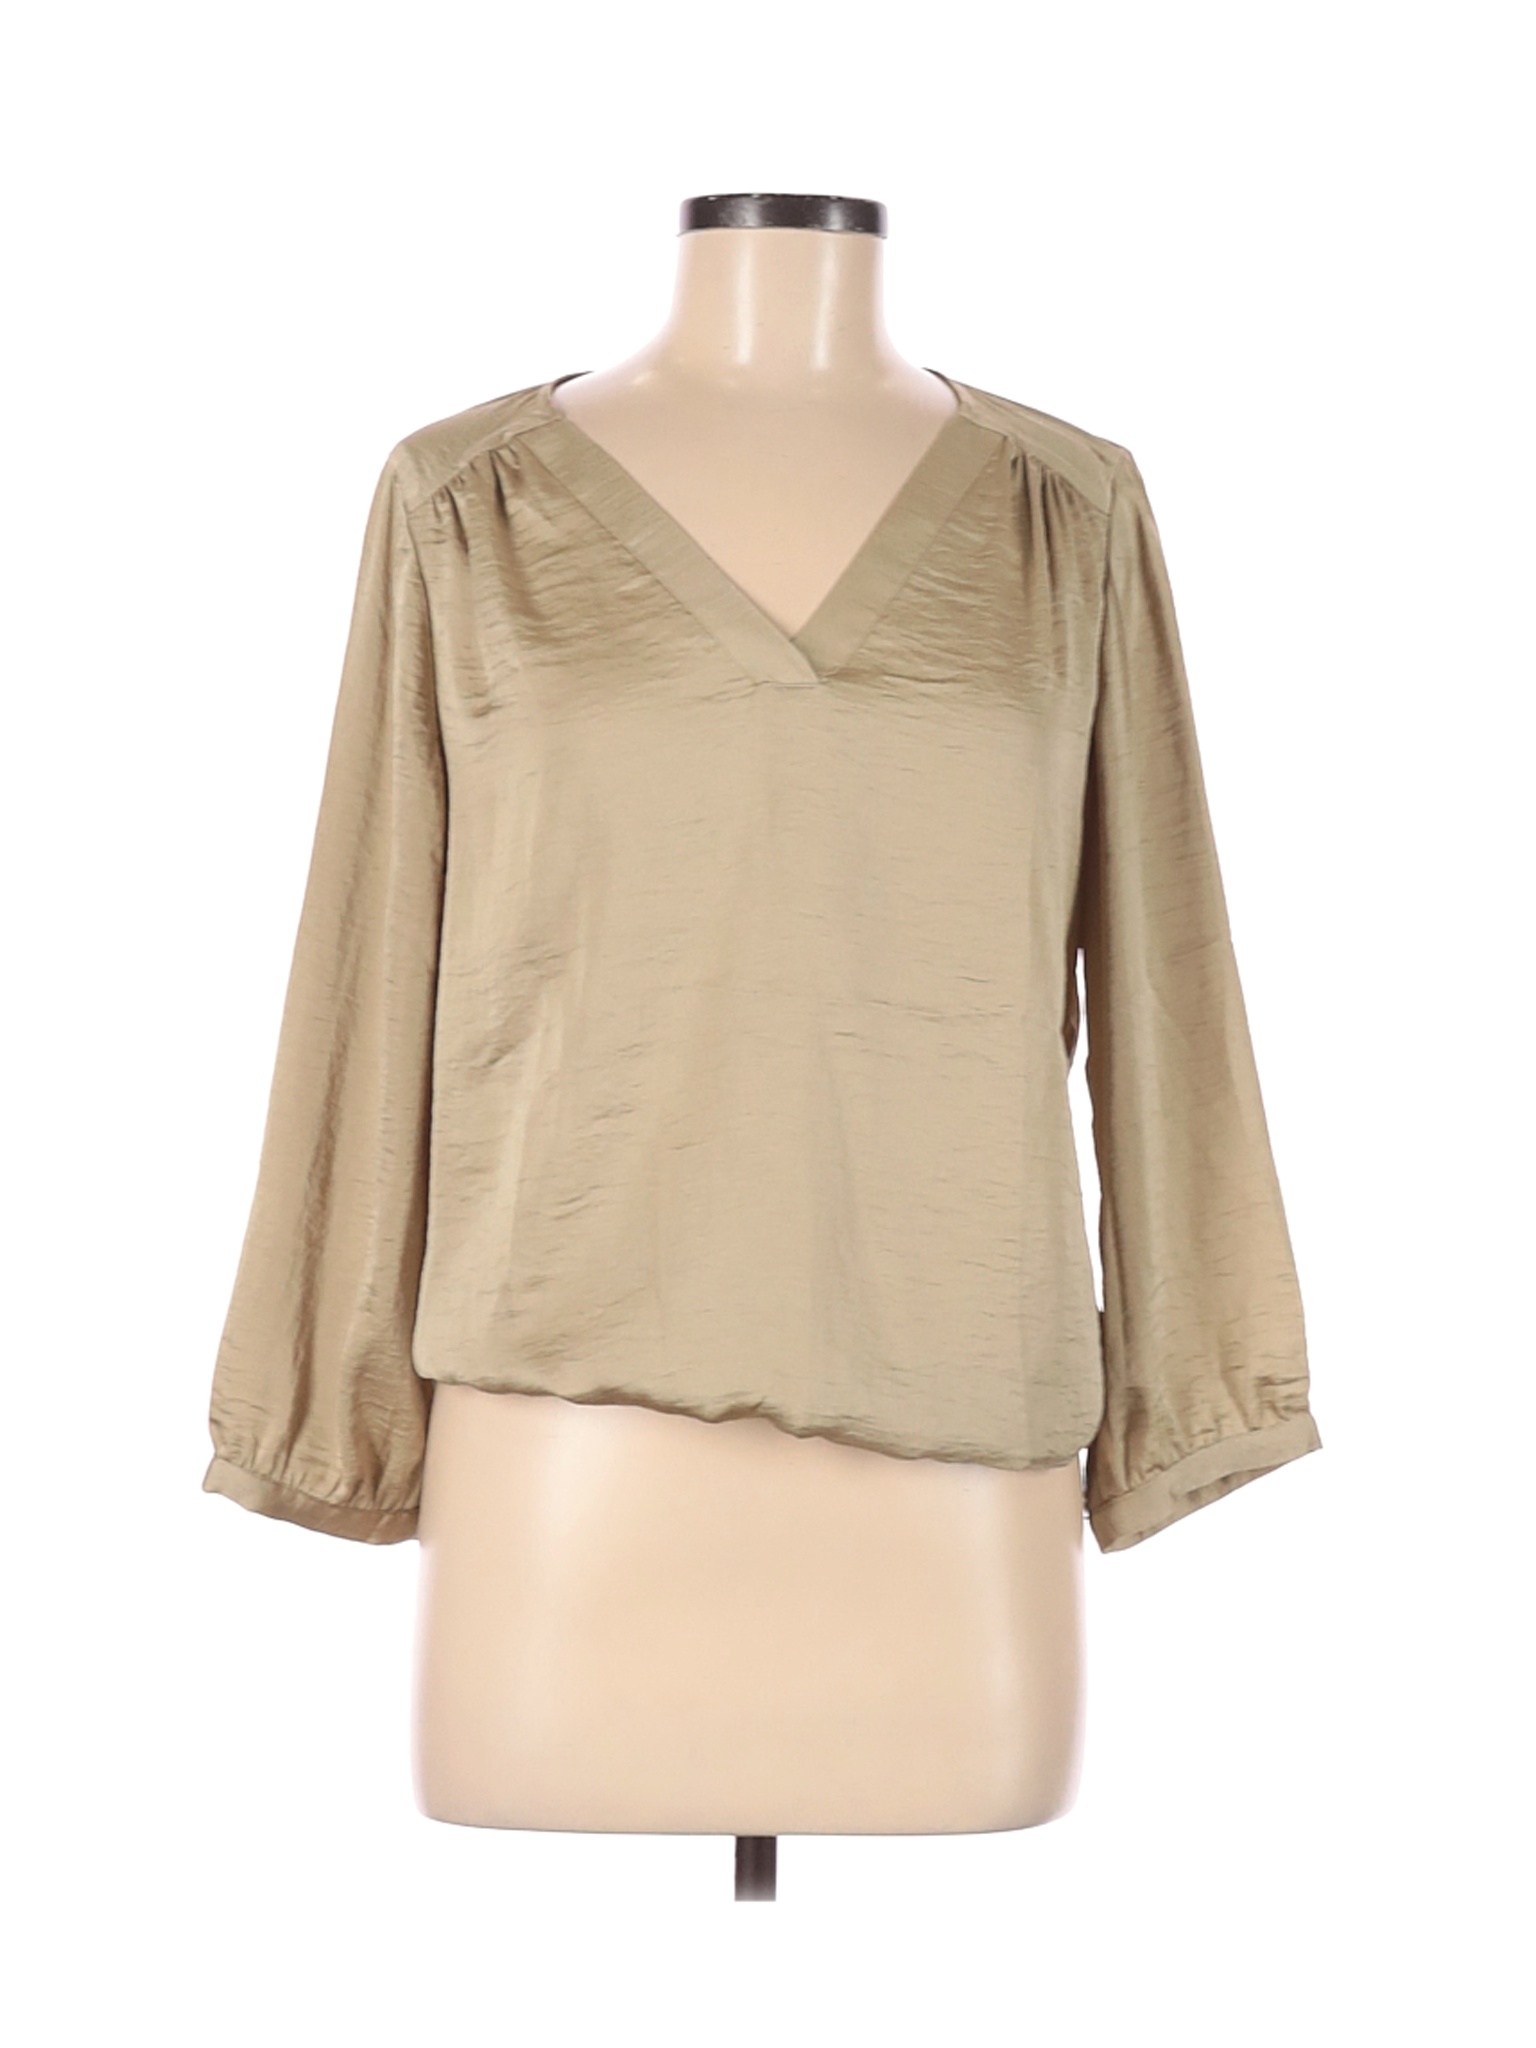 The Limited Women Brown 3/4 Sleeve Blouse M | eBay